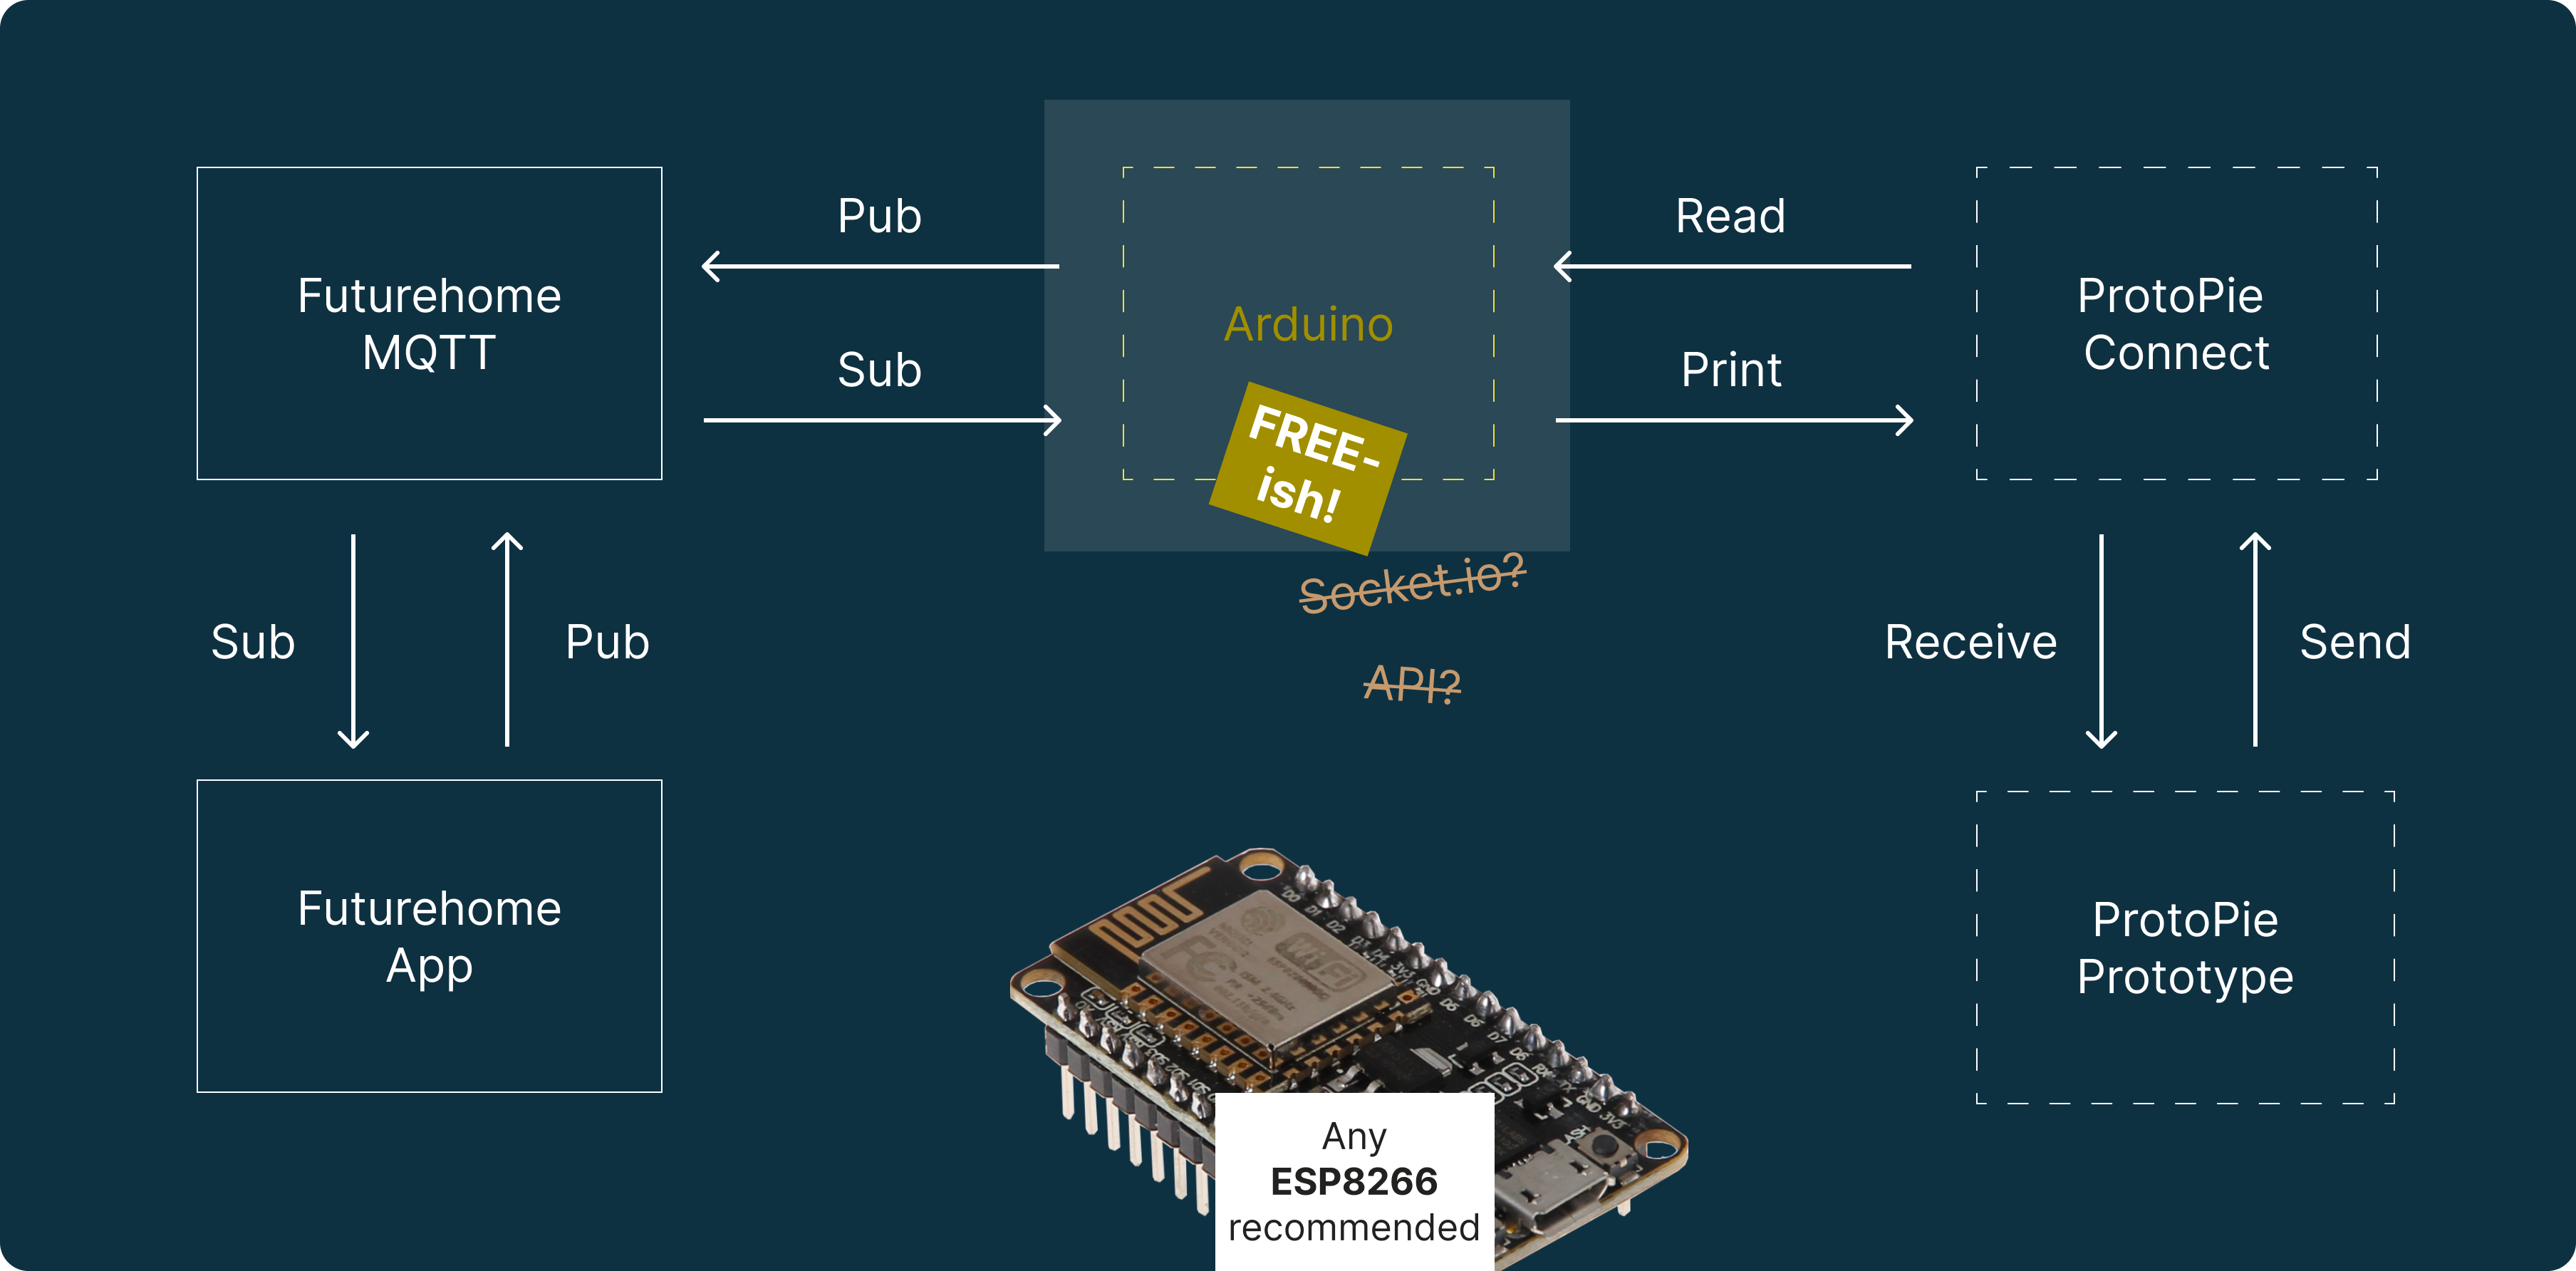 Arduino is just an intermediary for you to translate and format the messages between your MQTT app and ProtoPie.